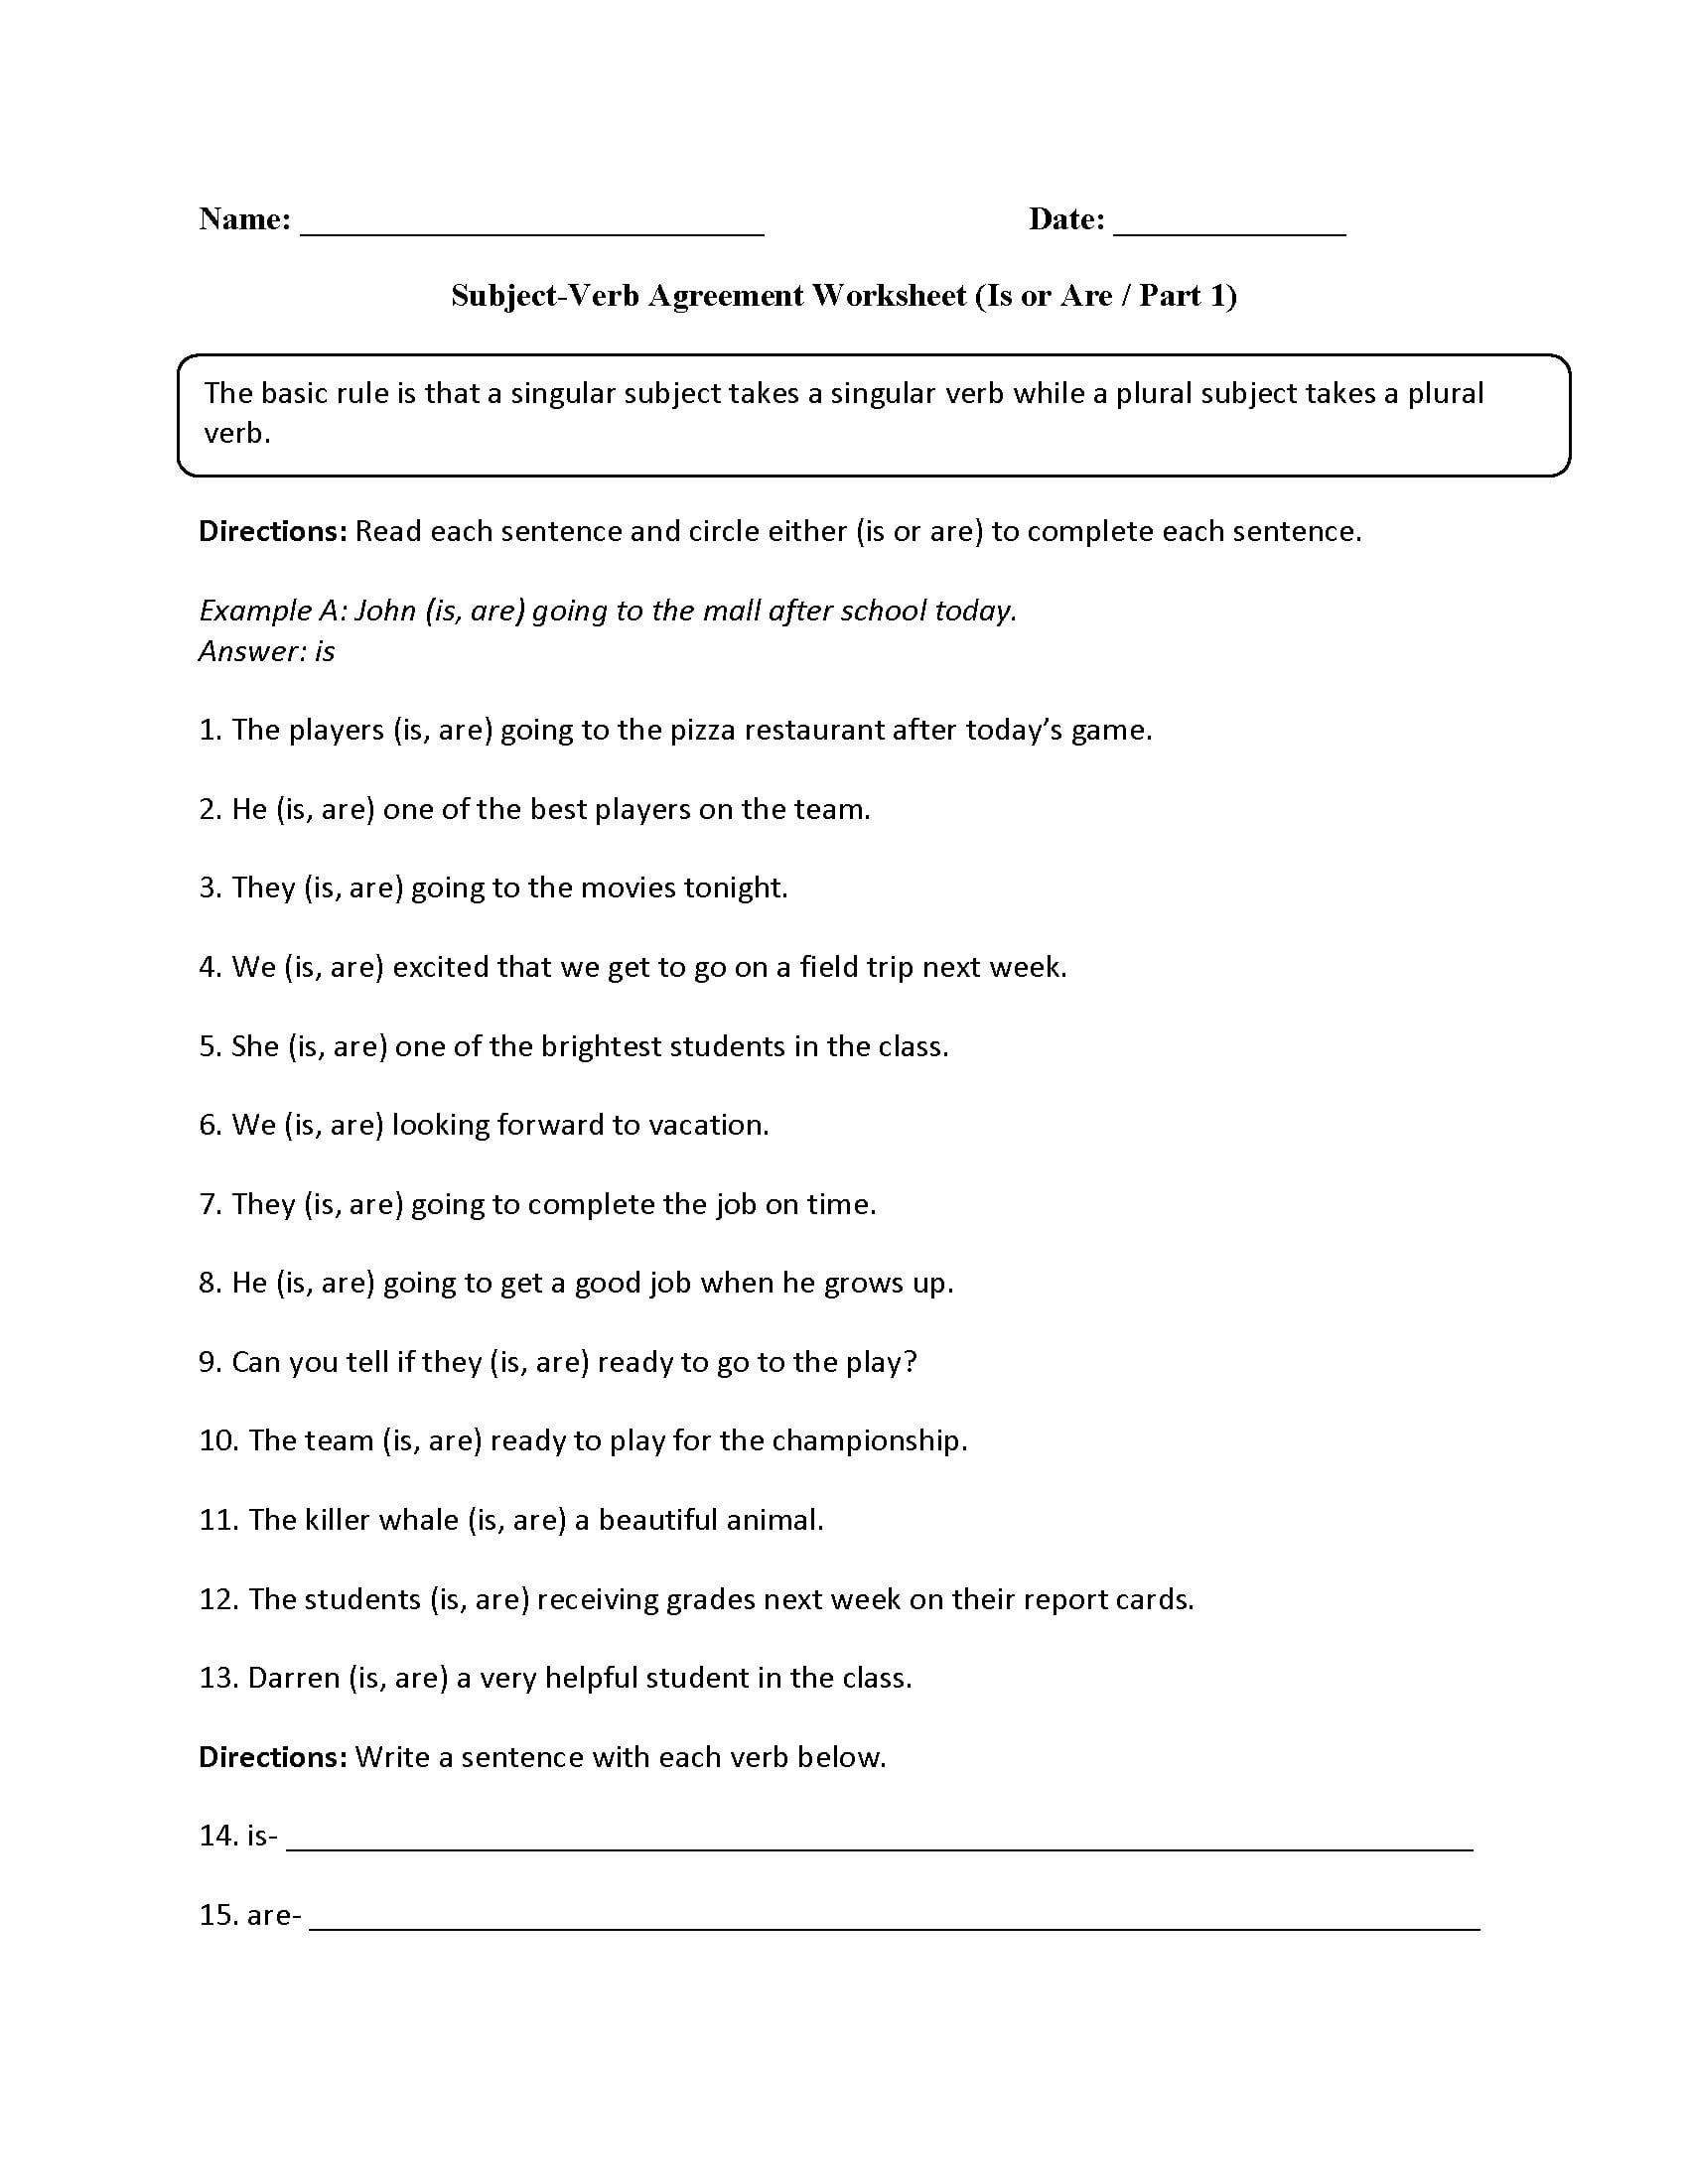 Verbs Worksheets  Subject Verb Agreement Worksheets For Noun And Verb Practice Worksheets